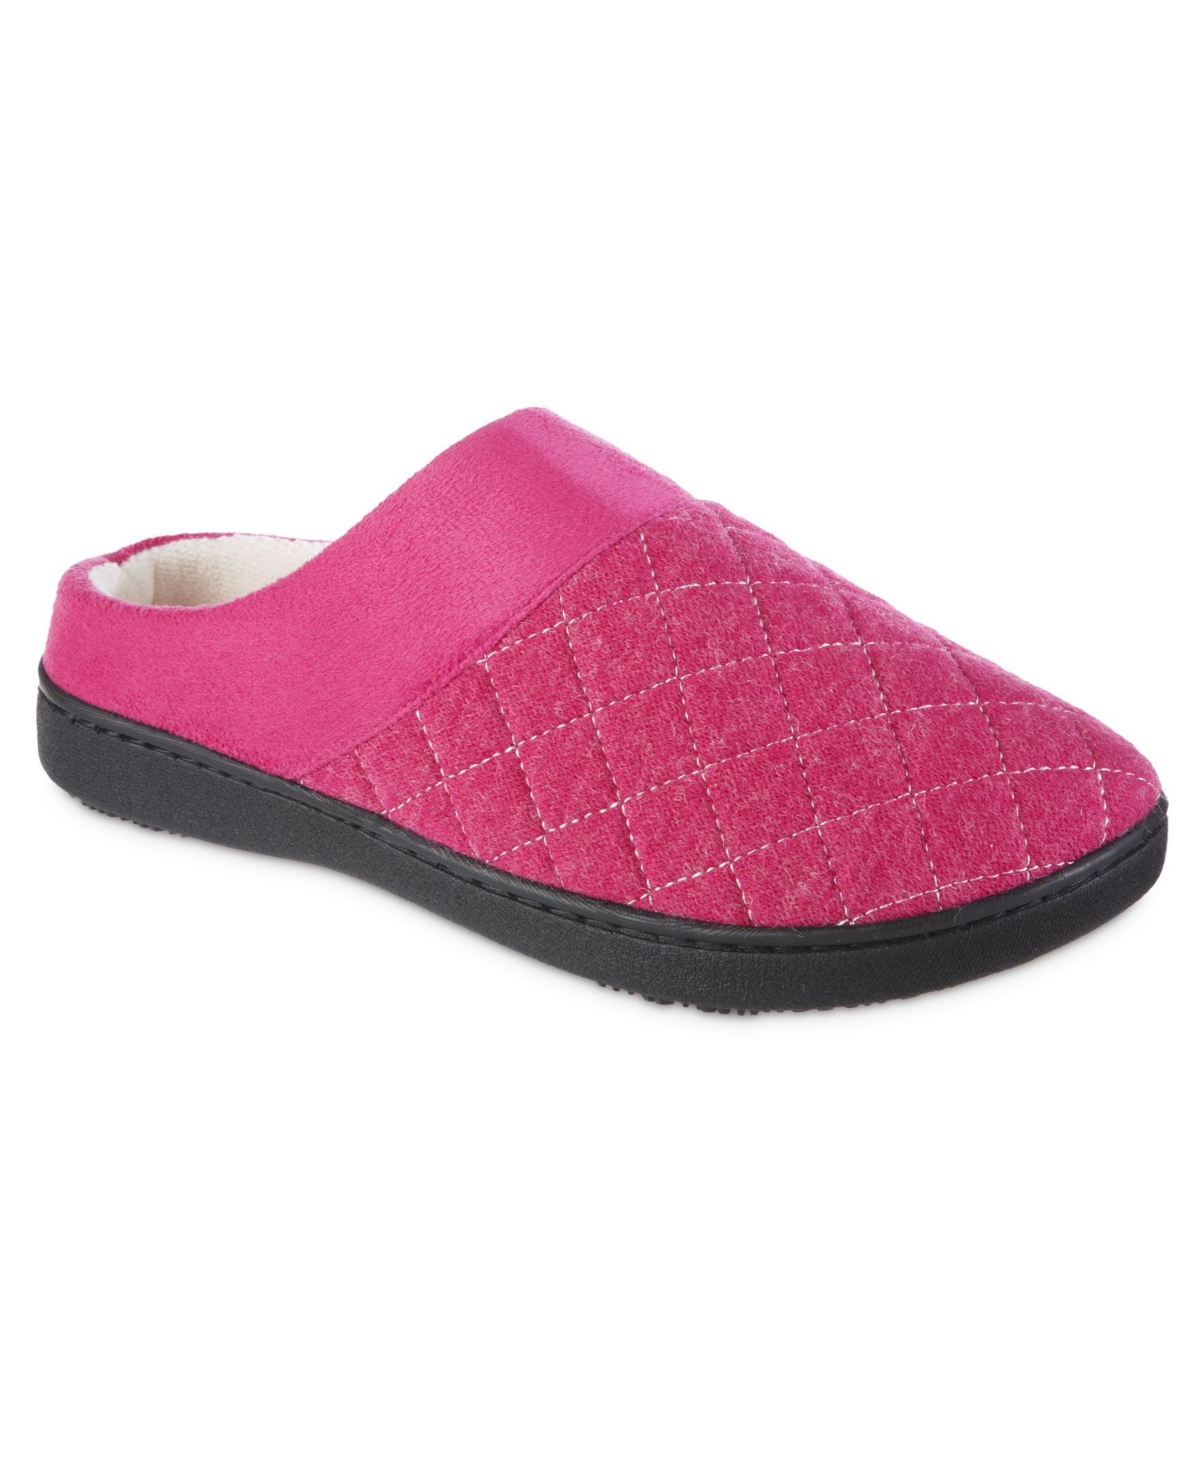 Women's Diamond Quilted Morgan Hoodback Slippers - Very Berry